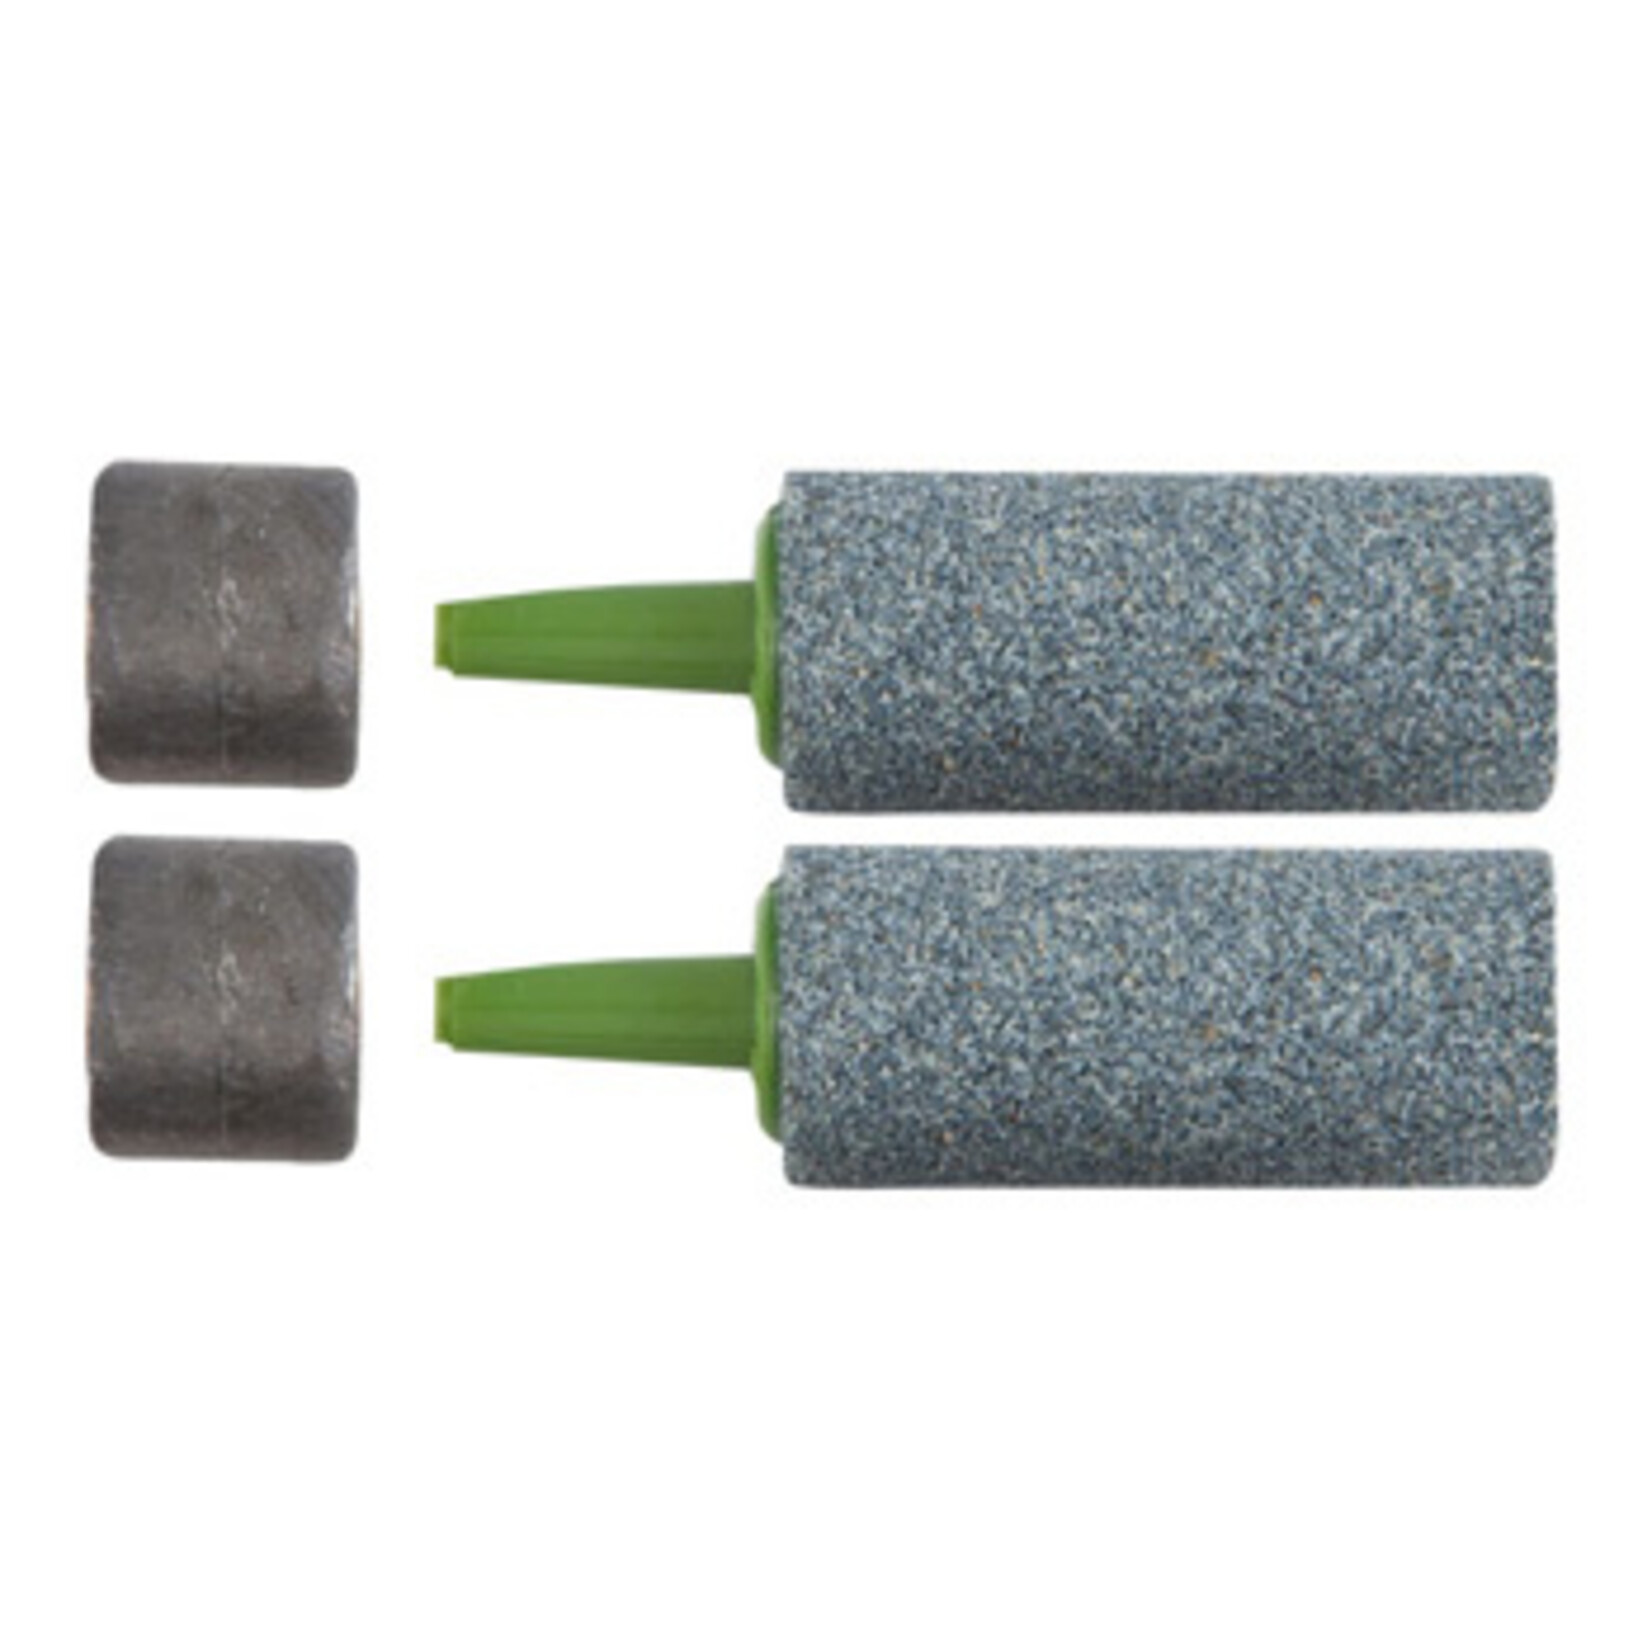 MARINE METAL PRODUCTS MARINE METAL WEIGHTED AIR STONES GLASS BEAD 2/PK AS-01